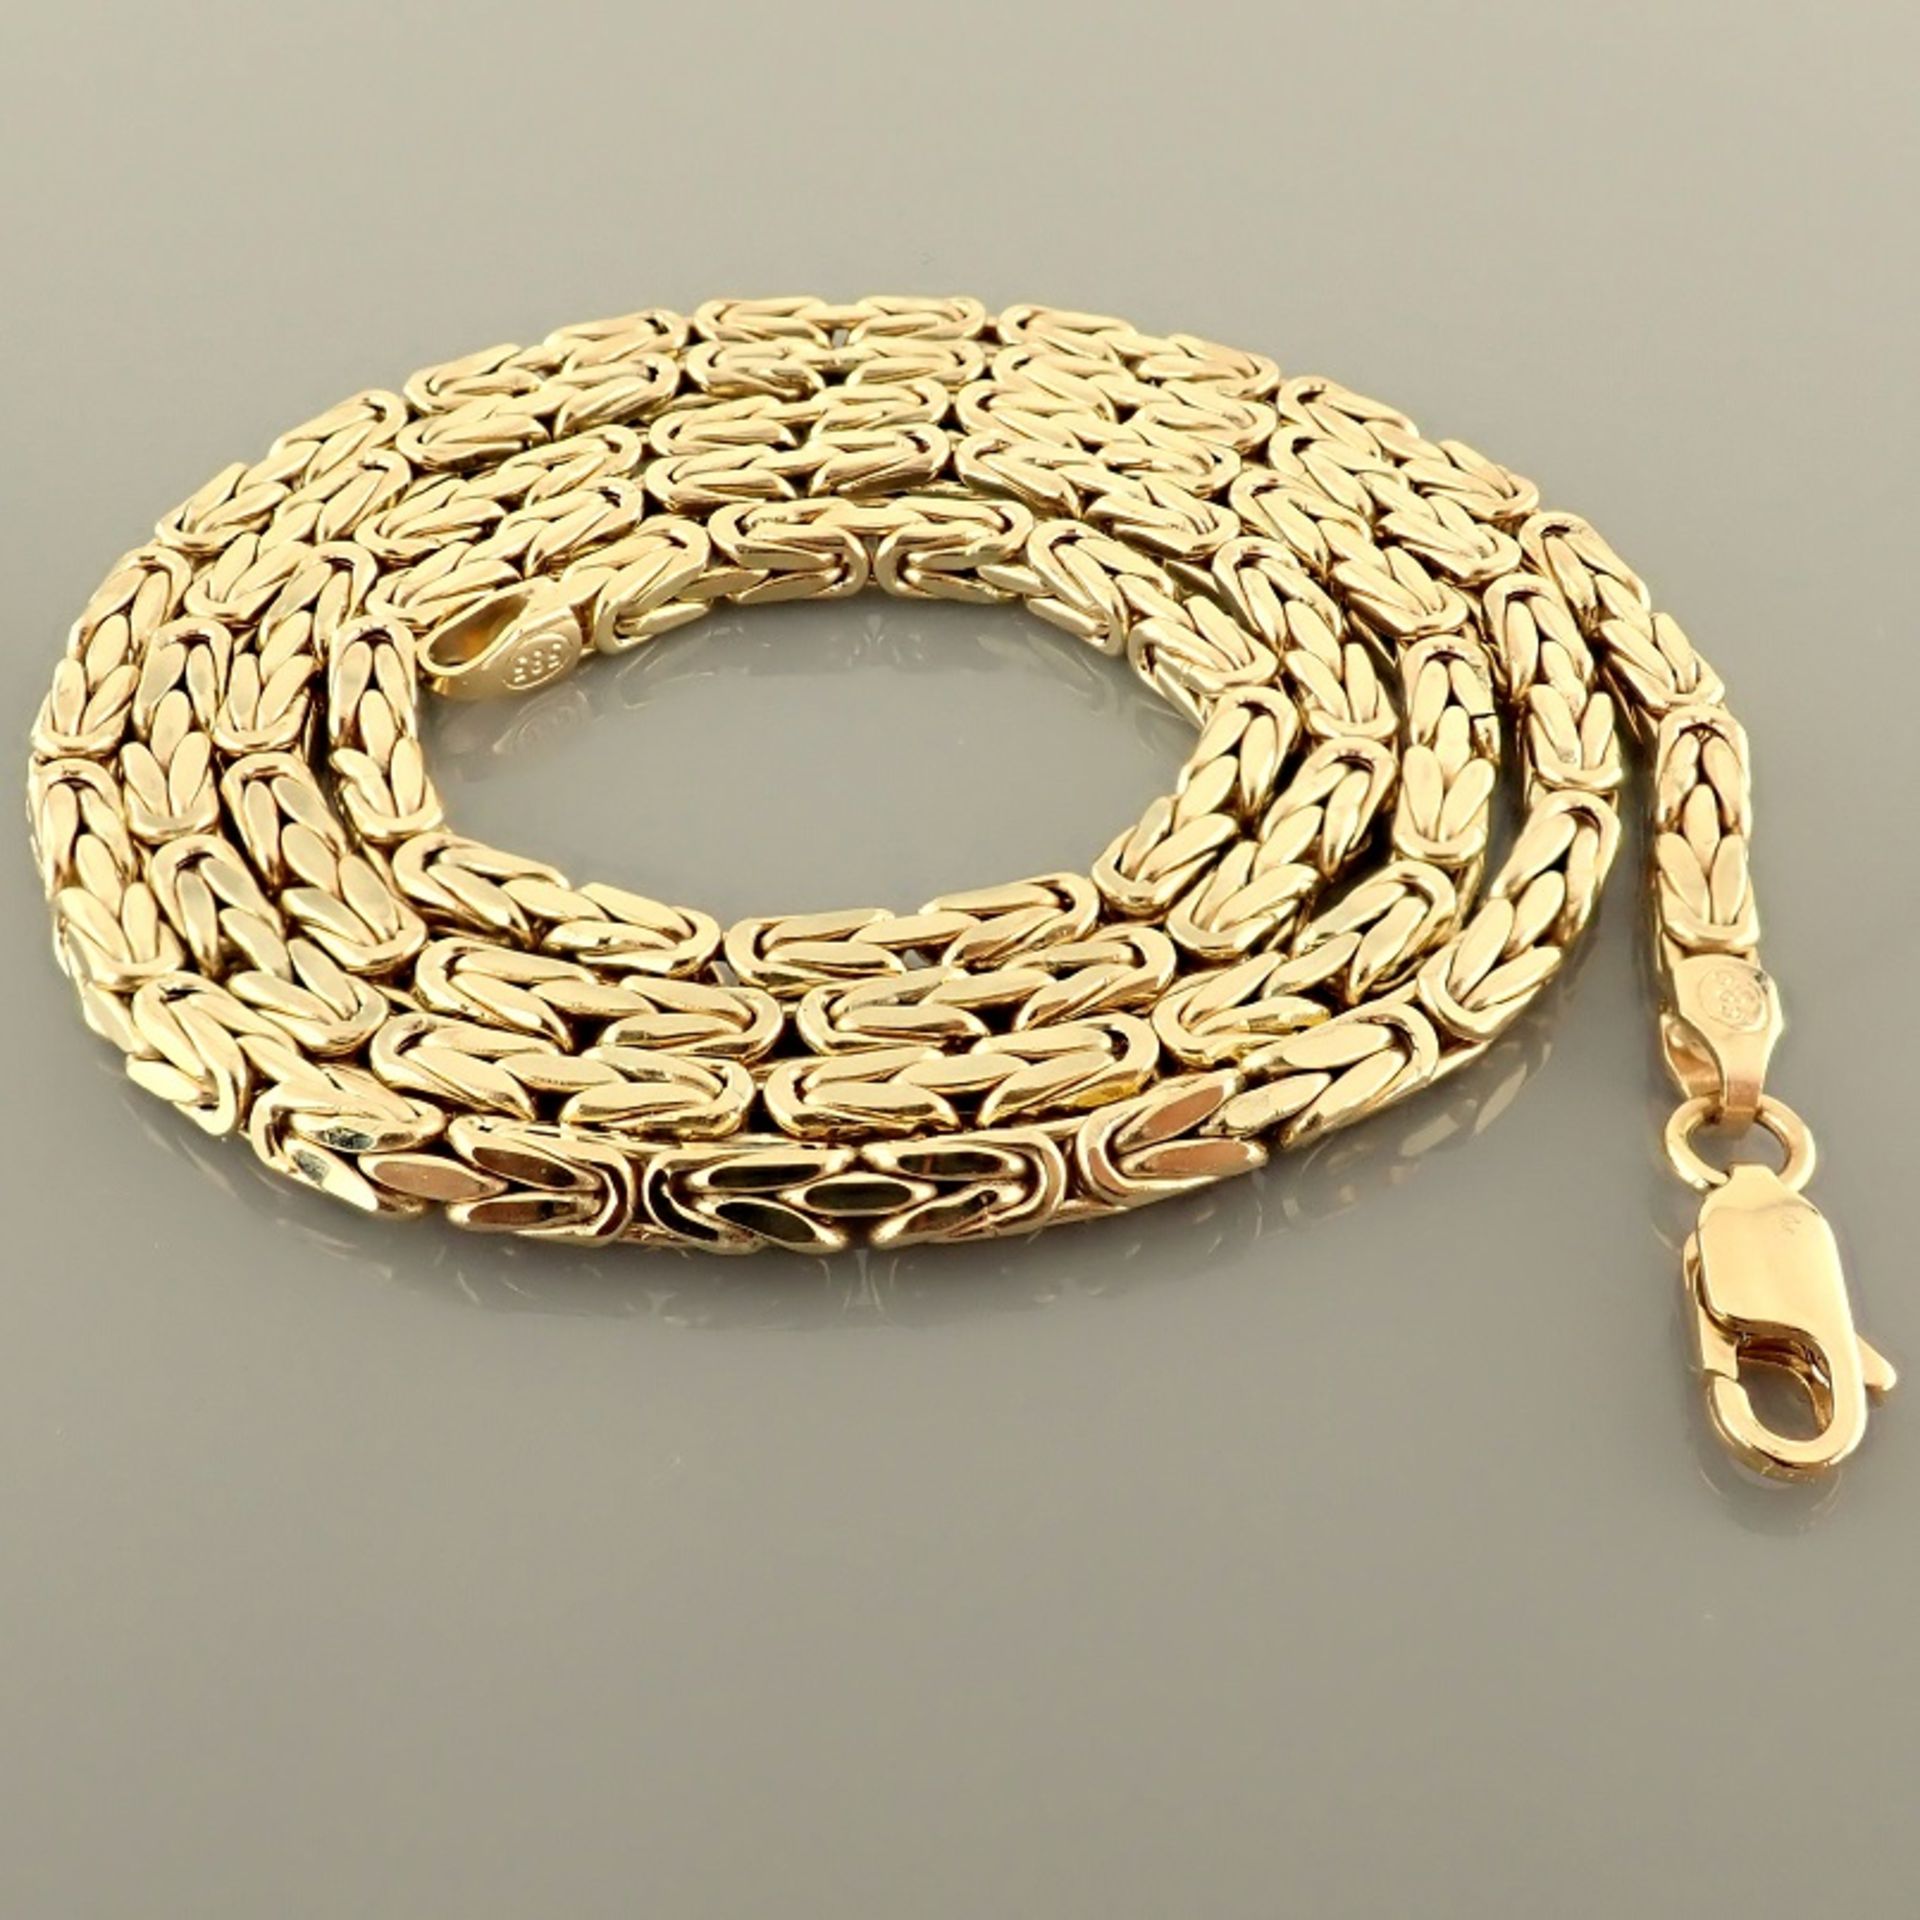 62 cm (24.4 in) Byzantine Chain Necklace. In 14K Yellow Gold